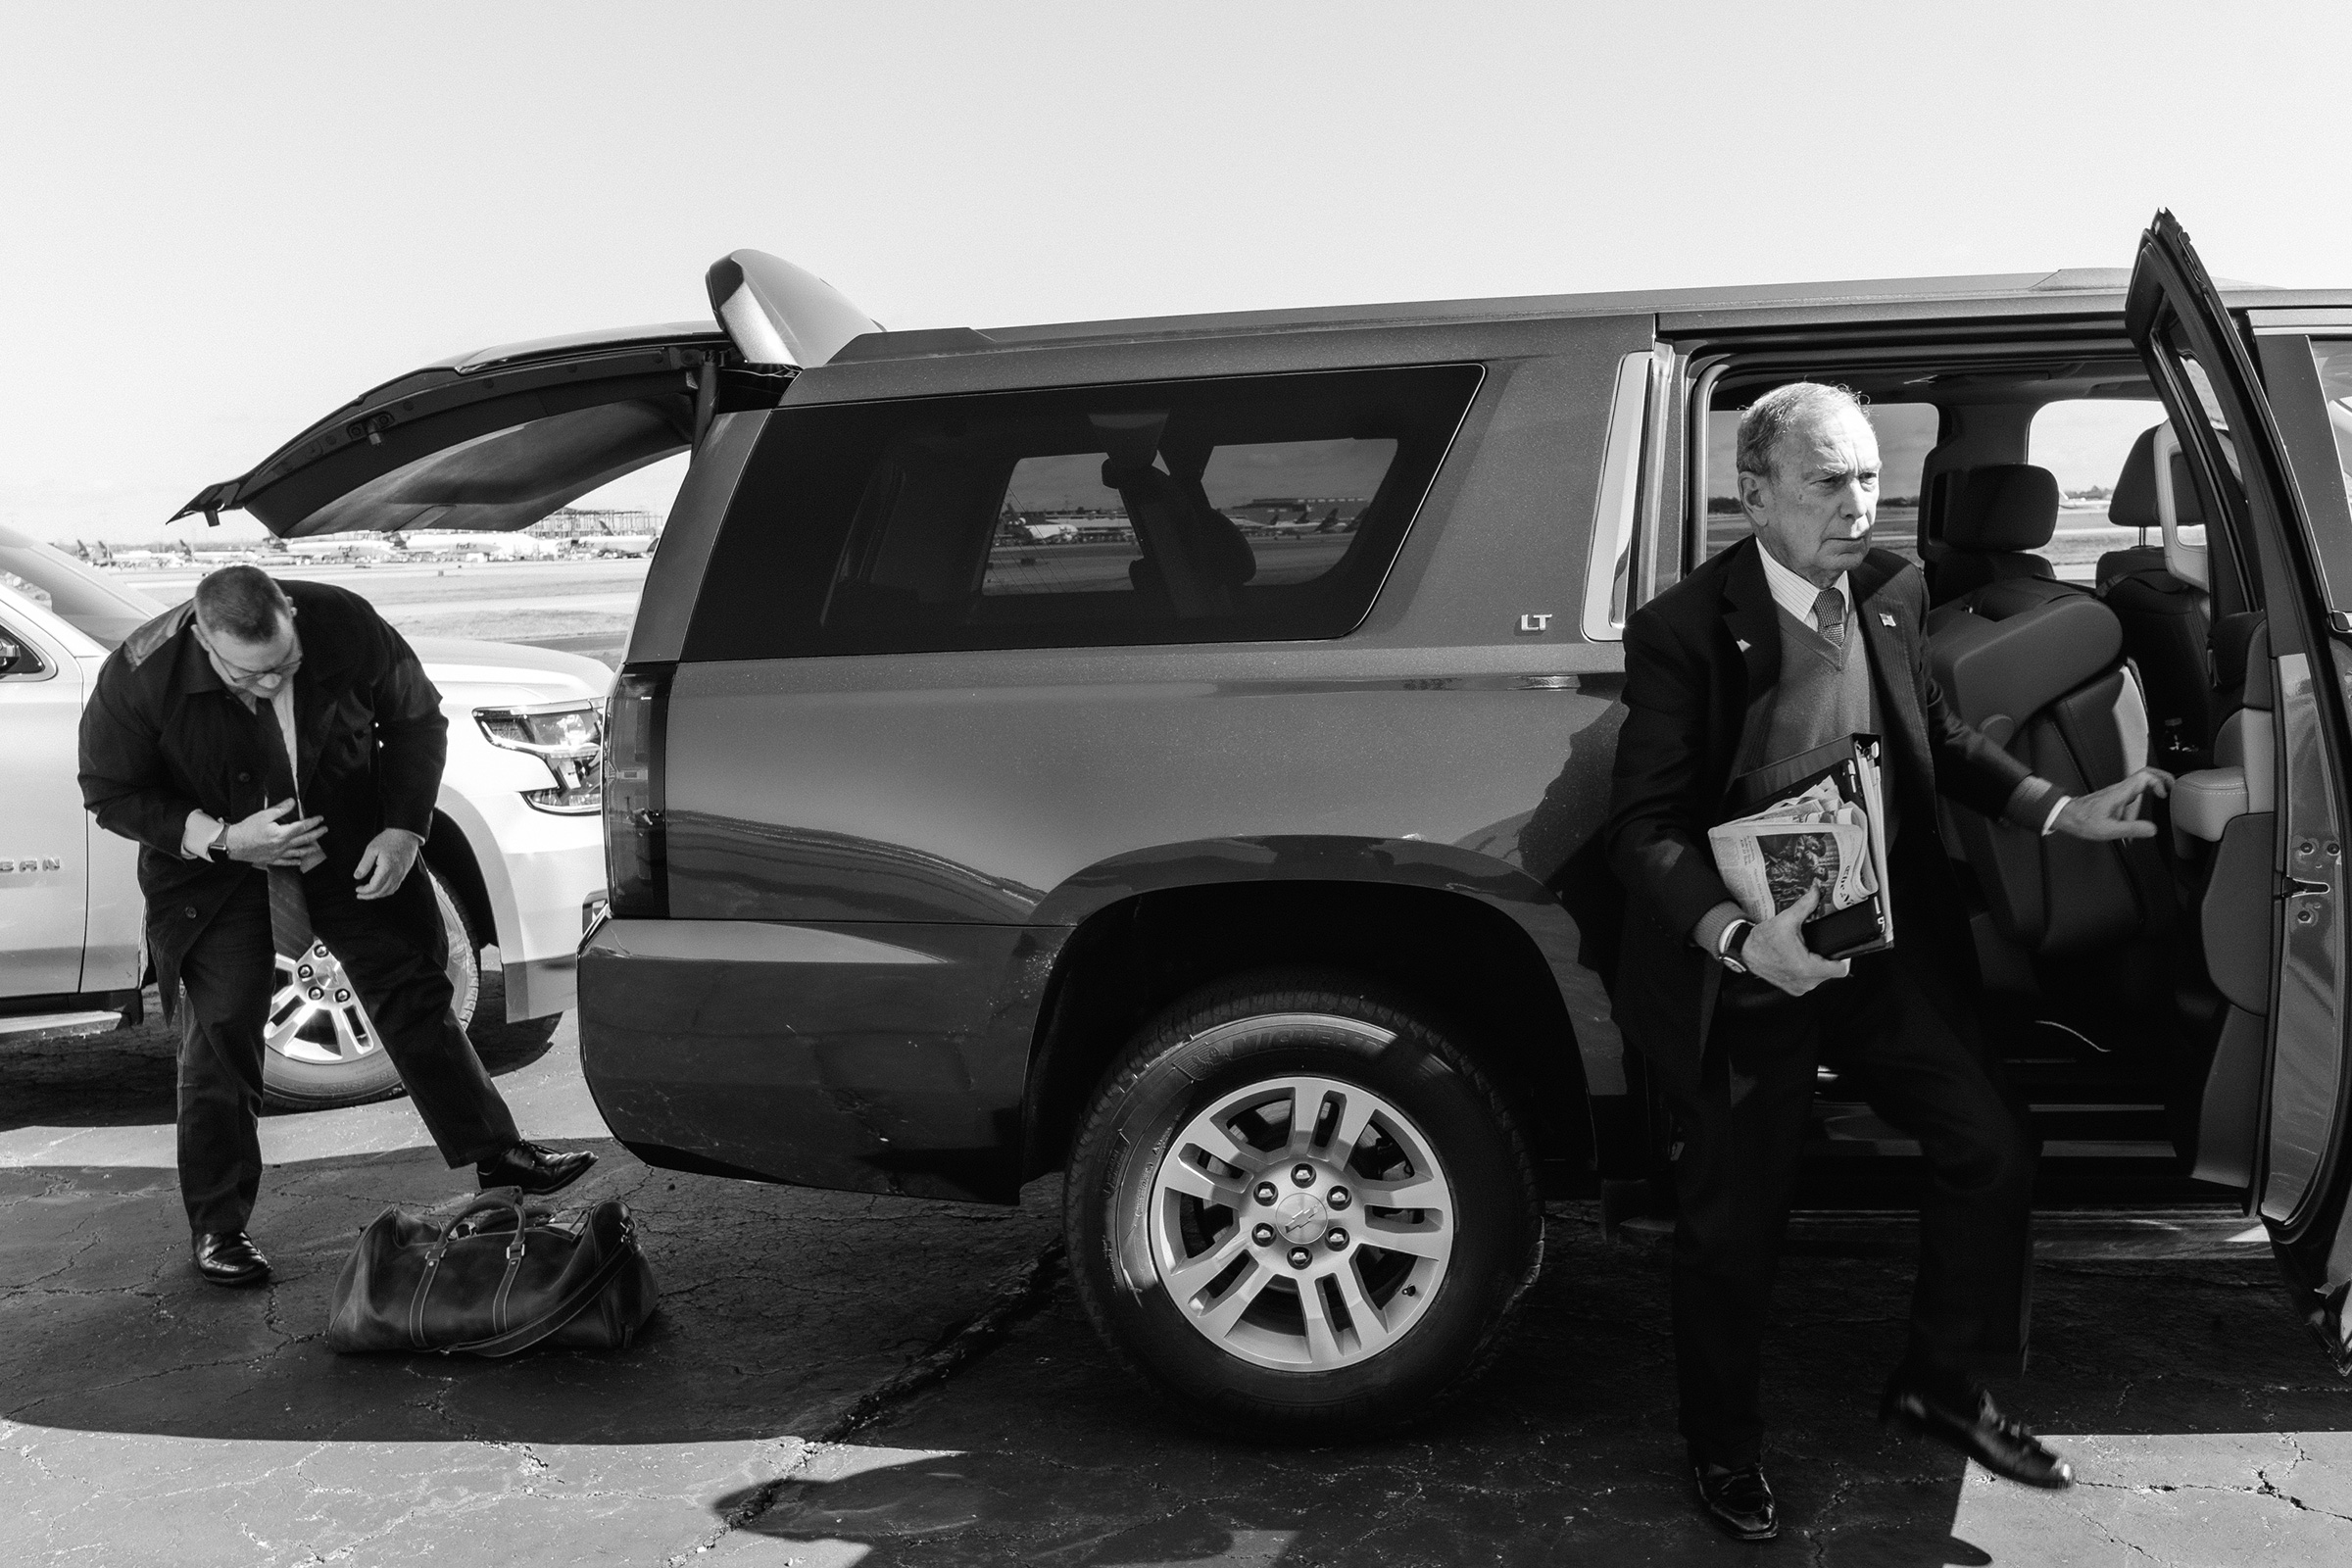 Bloomberg arrives at the airport for a flight in Memphis on Feb. 28. (Christopher Lee for TIME)